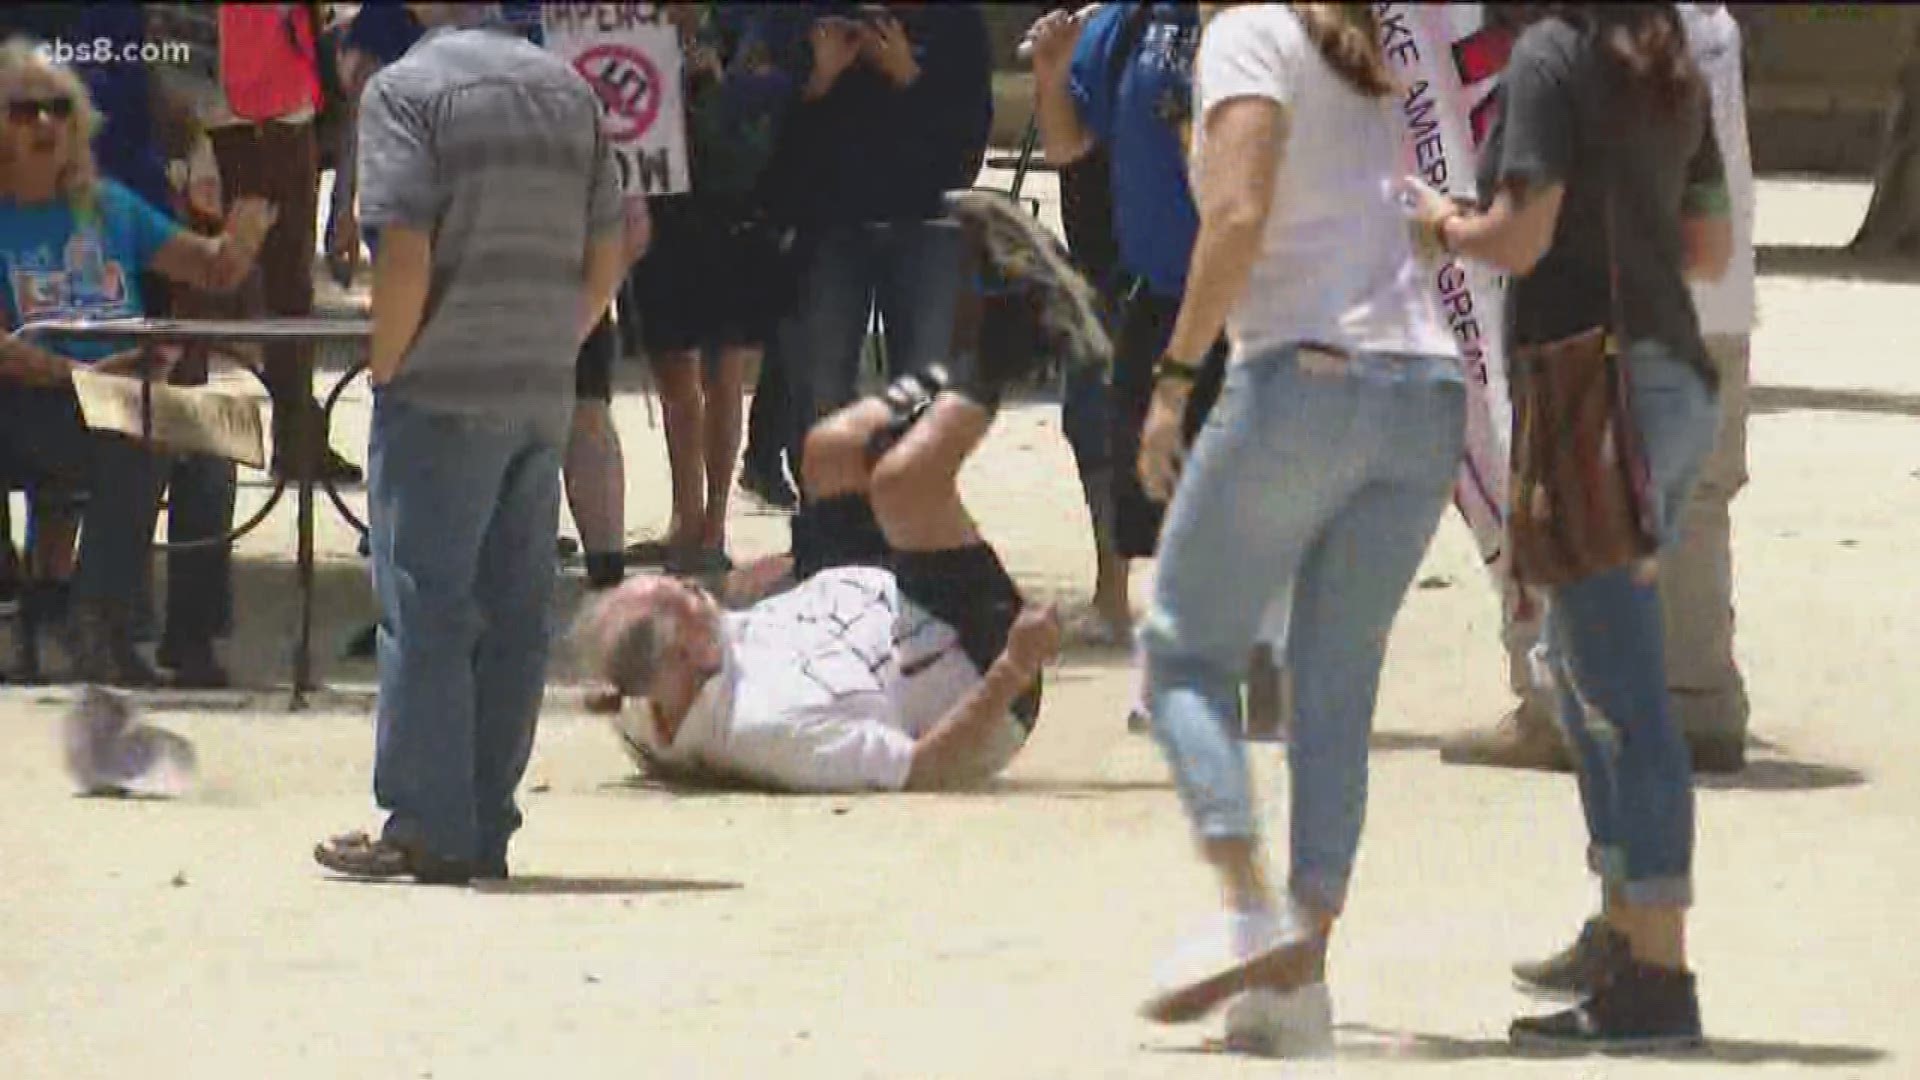 The incident started after a man protesting the president shoved supporters of the president.